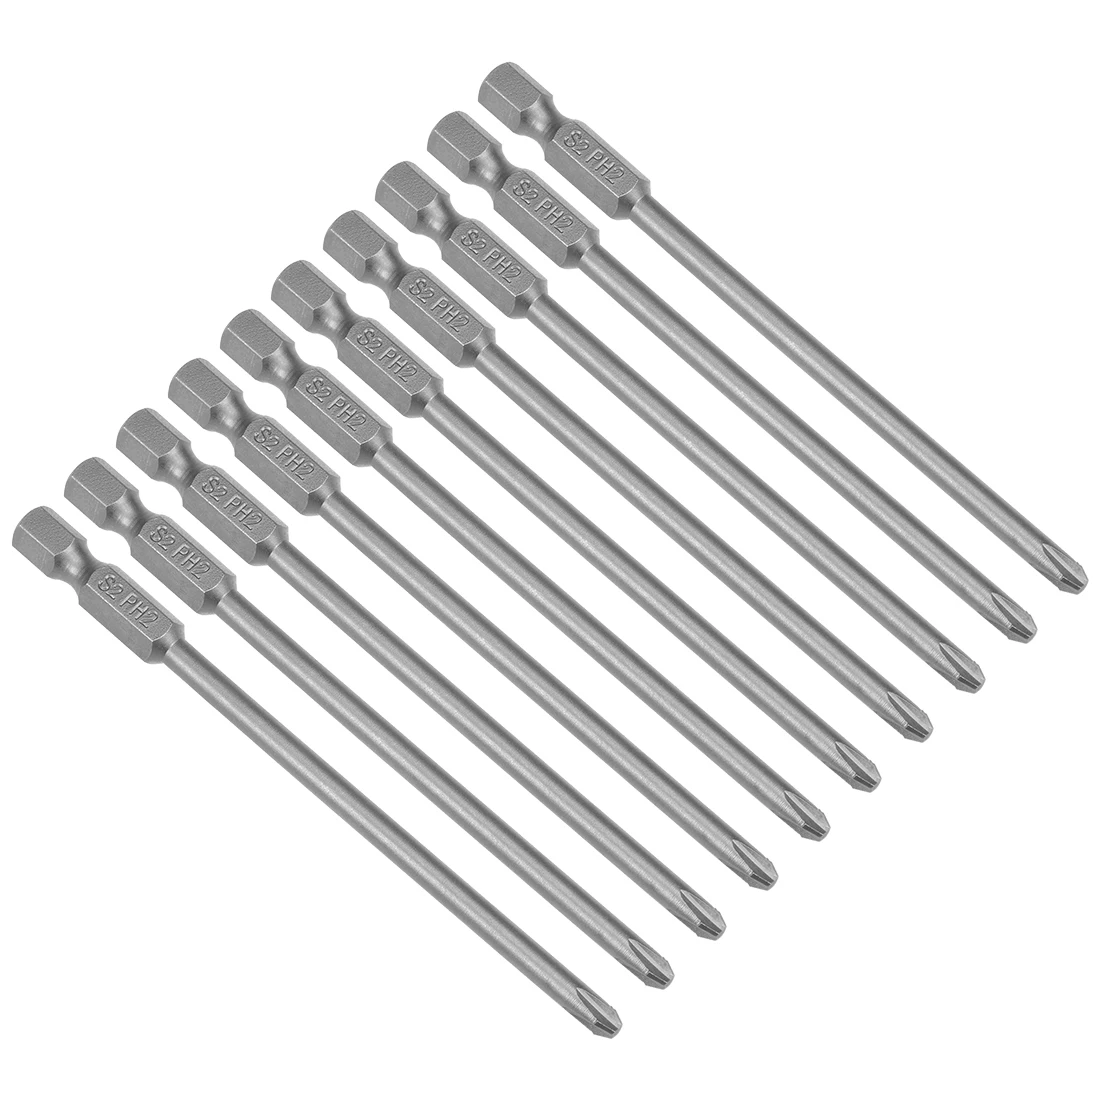 

uxcell 10pcs 100mm PH2 1/4" Hex Shank 4mm Magnetic Phillips Head Screwdriver Bits S2